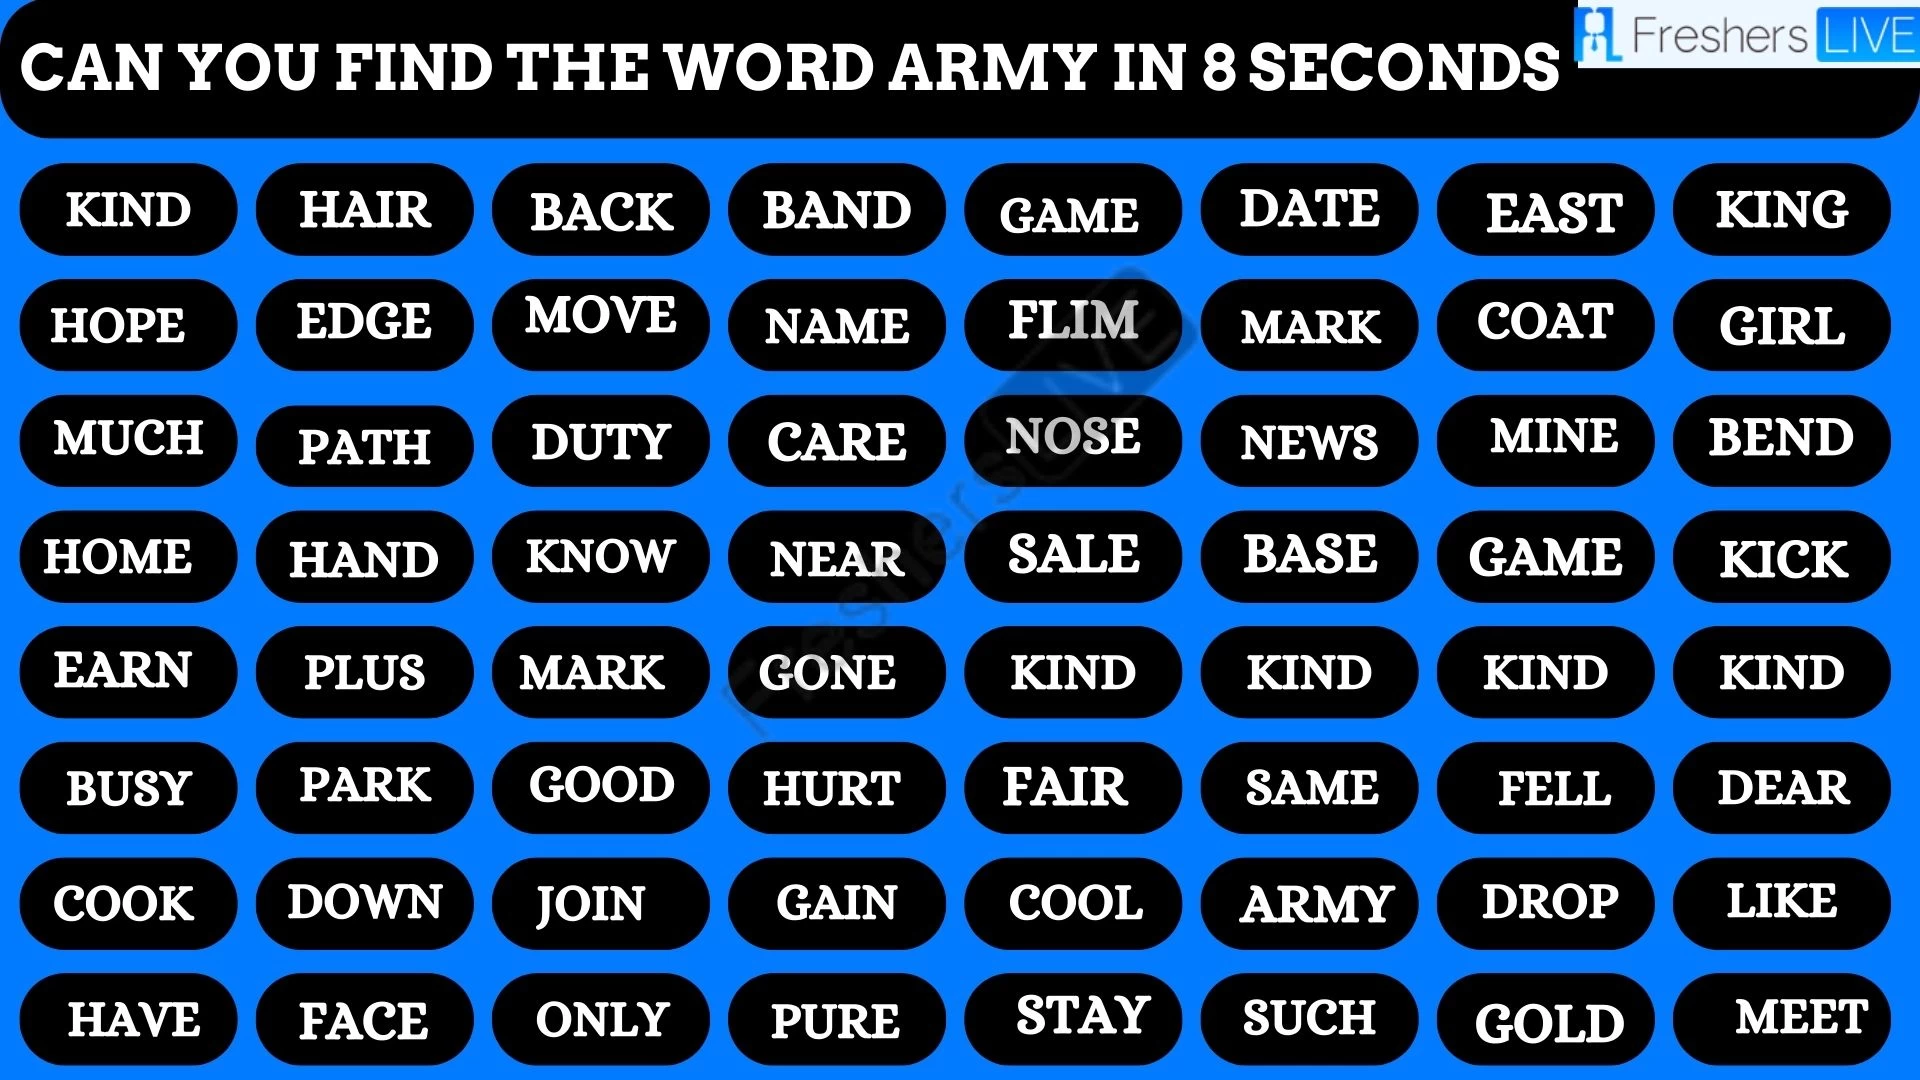 Only 20/20 HD Vision People Can Find the Word Army in 8 Seconds